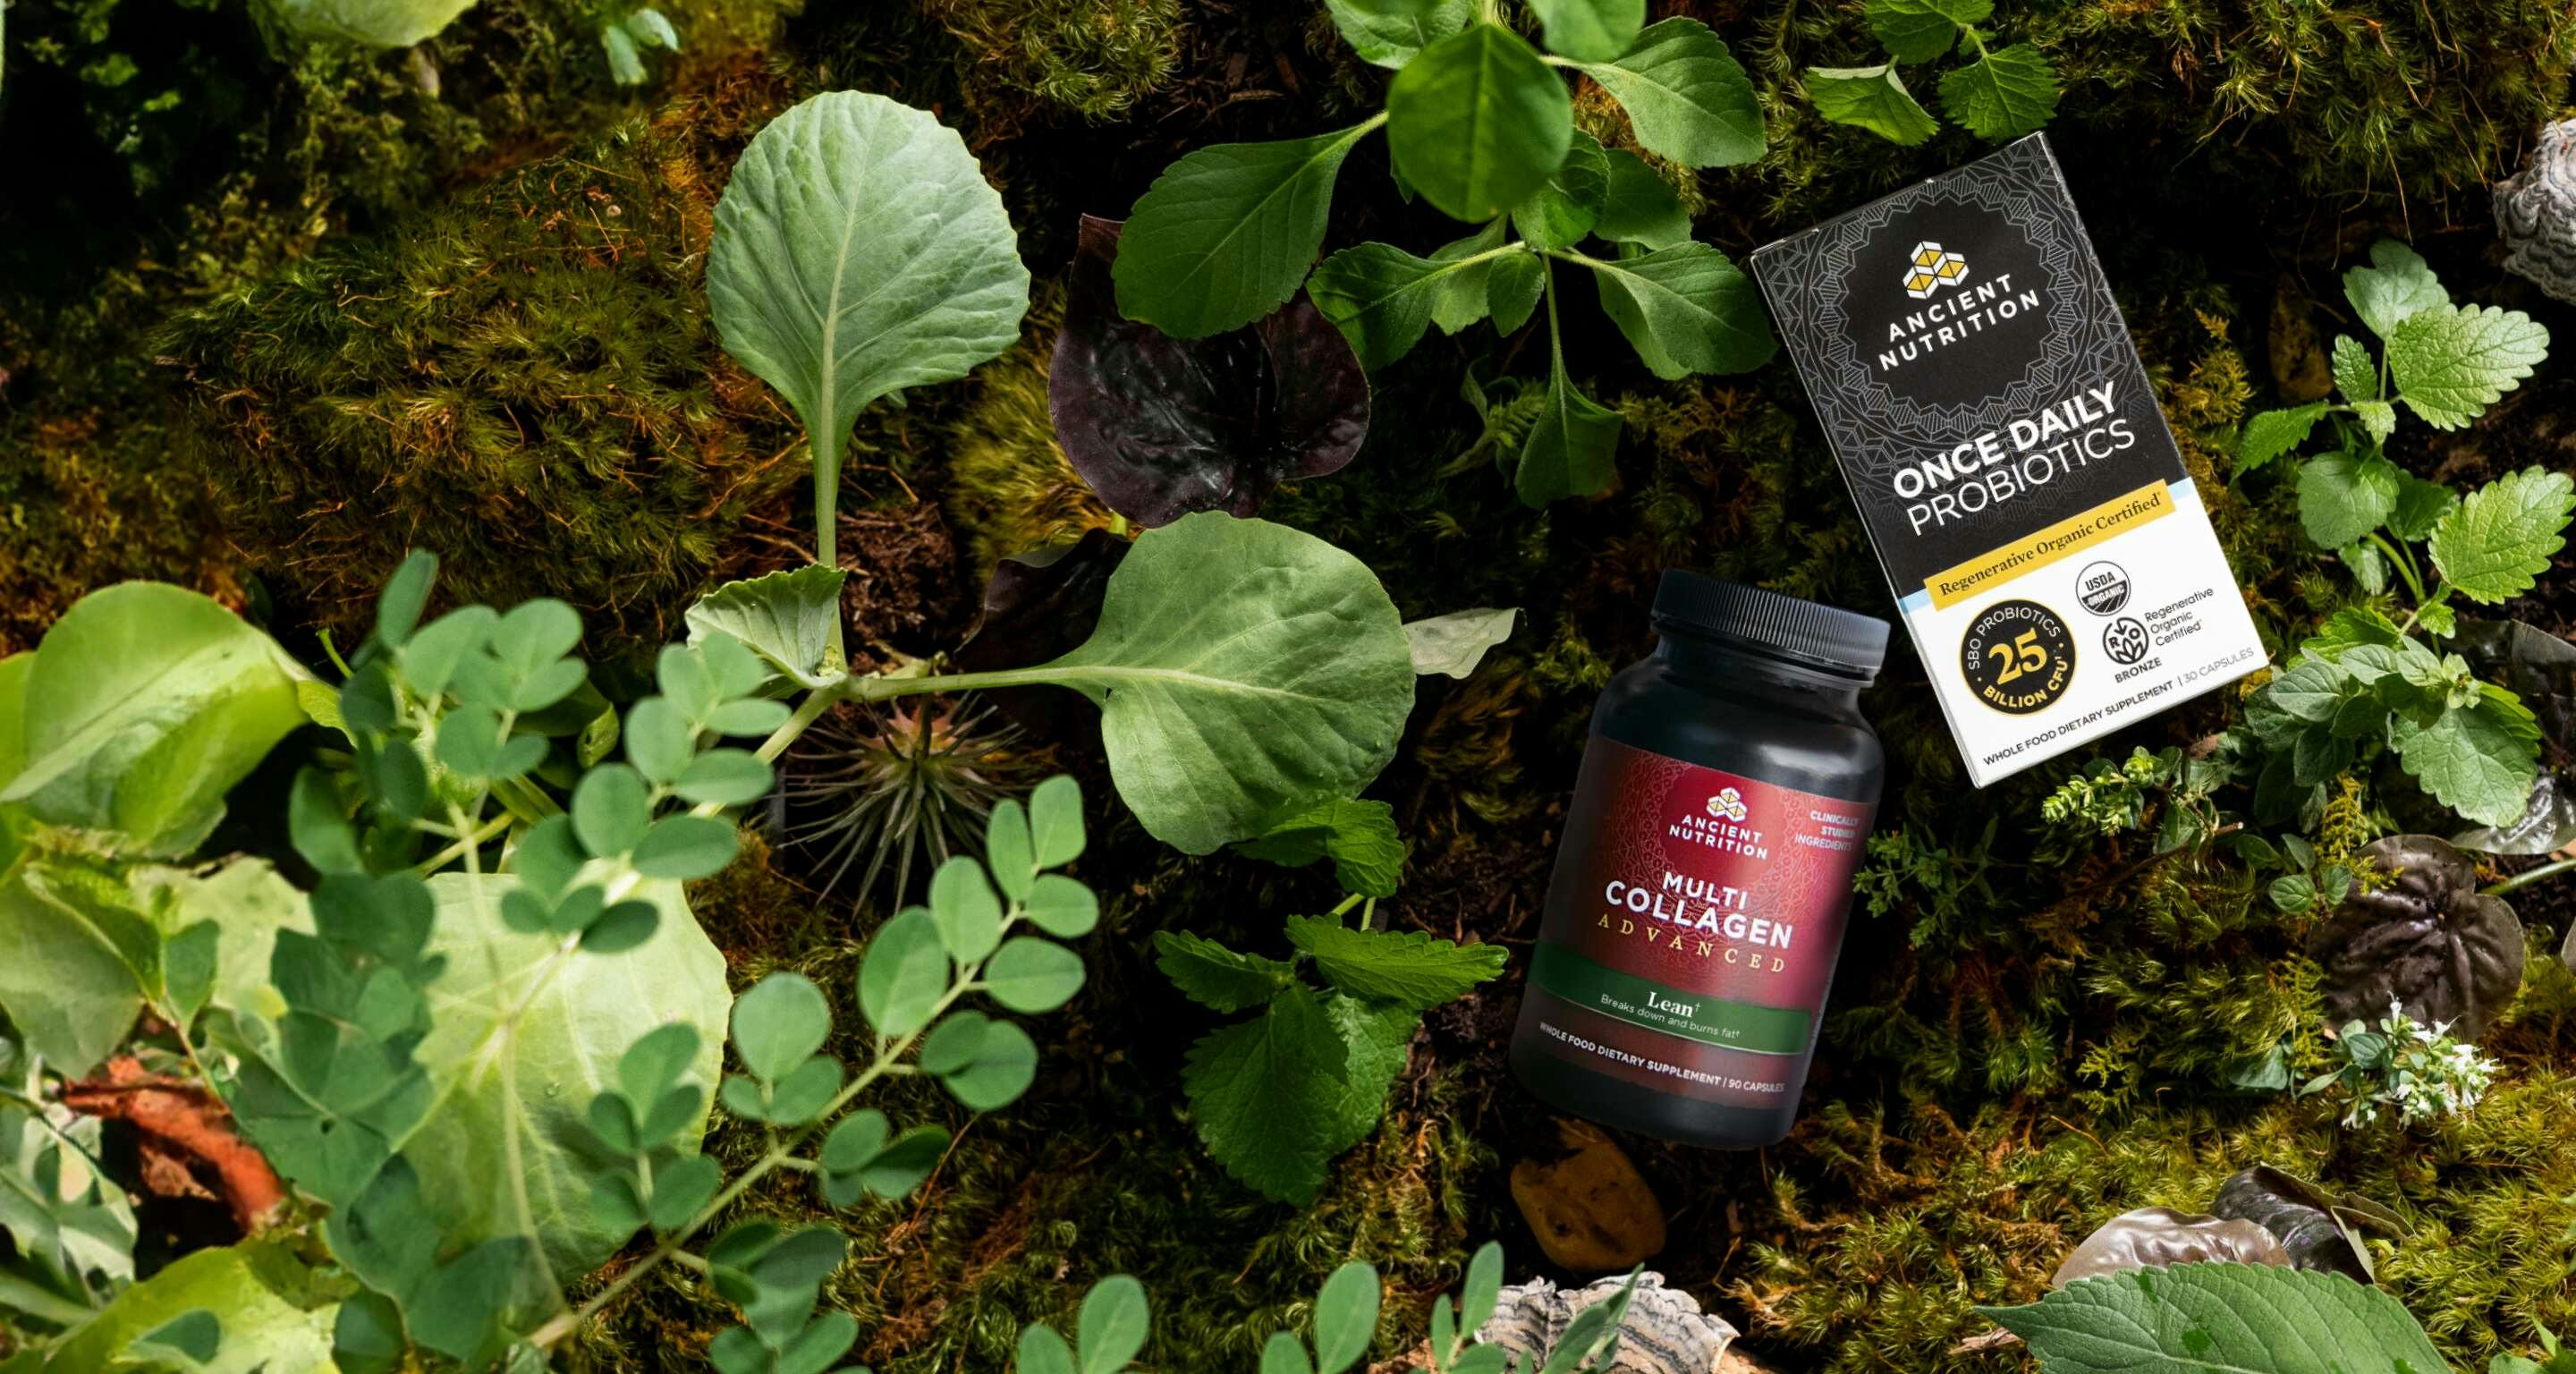 Ancient Nutrition Regenerative Organic Certified Once Daily Probiotics and Multi Collagen Advanced Lean Capsules on a forest ground.